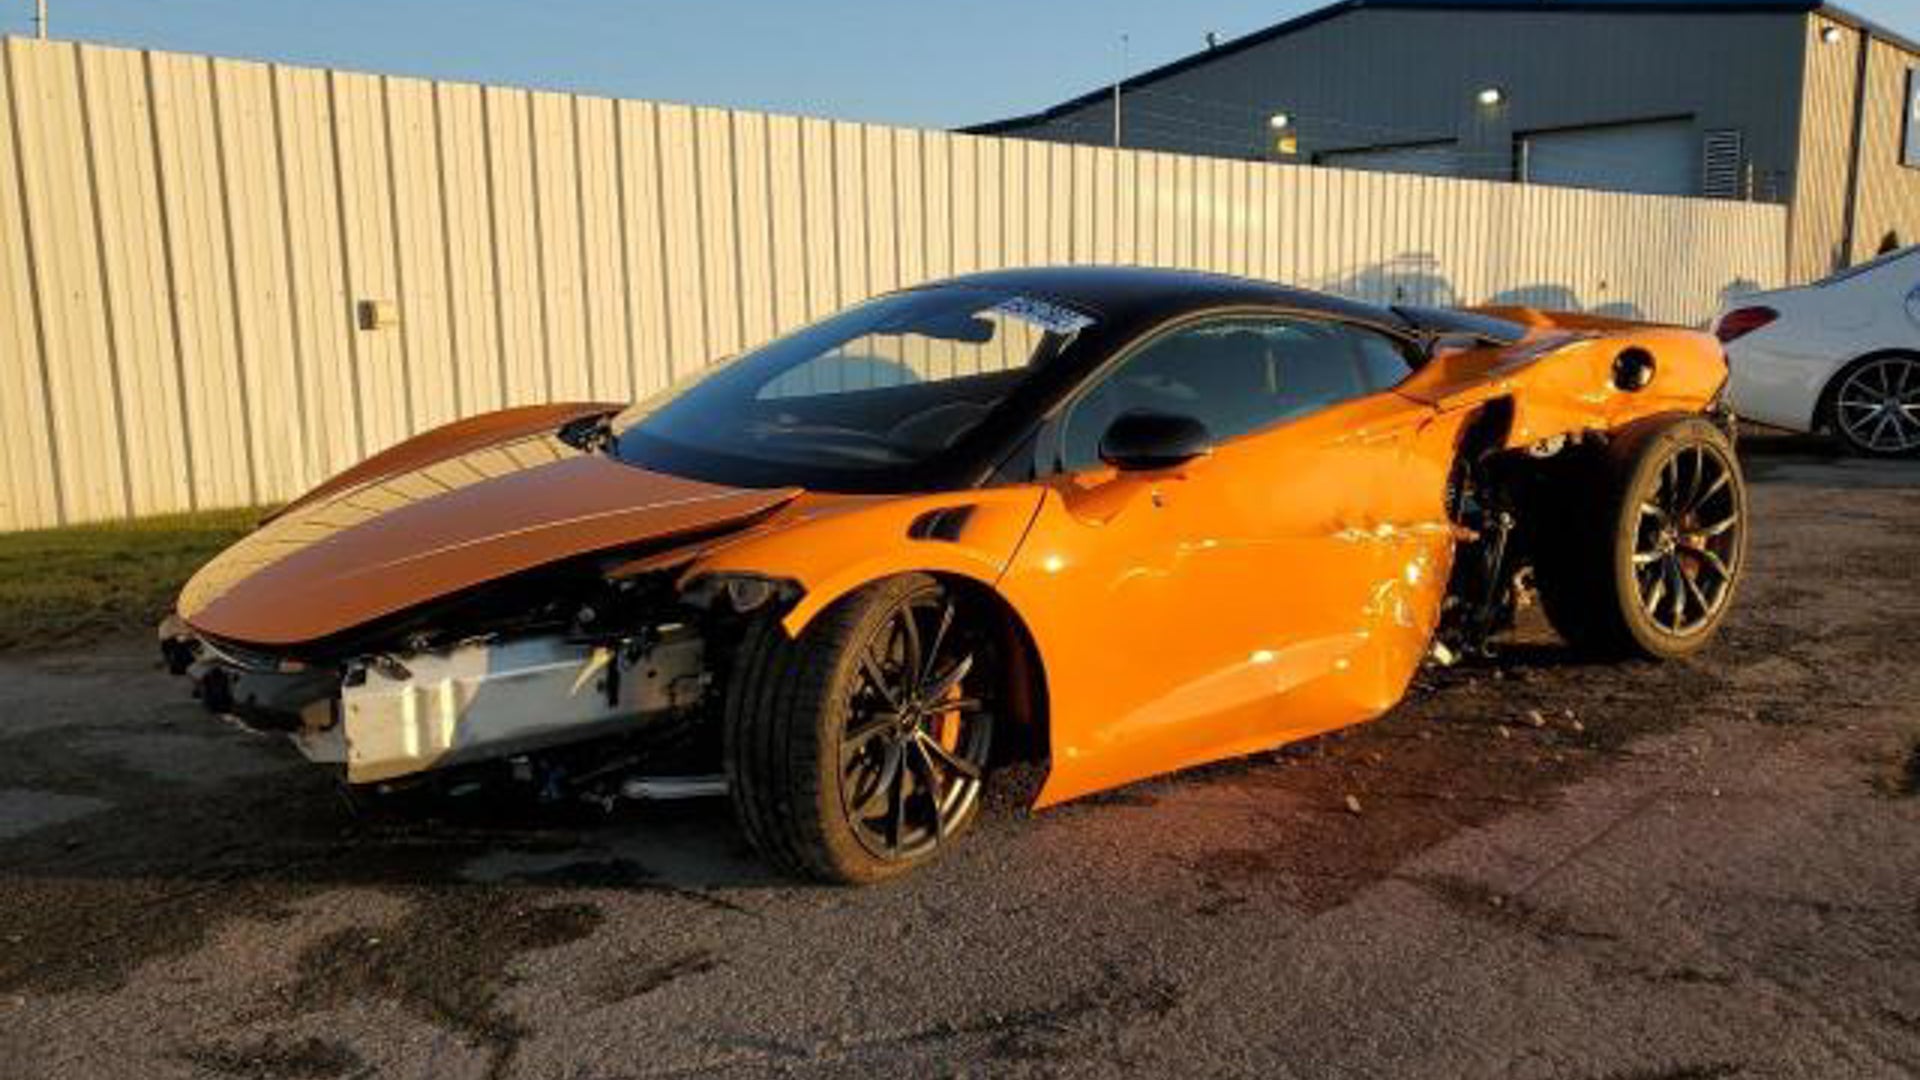 This 2023 McLaren Artura For Sale at a Salvage Auction Is a Head-Scratcher